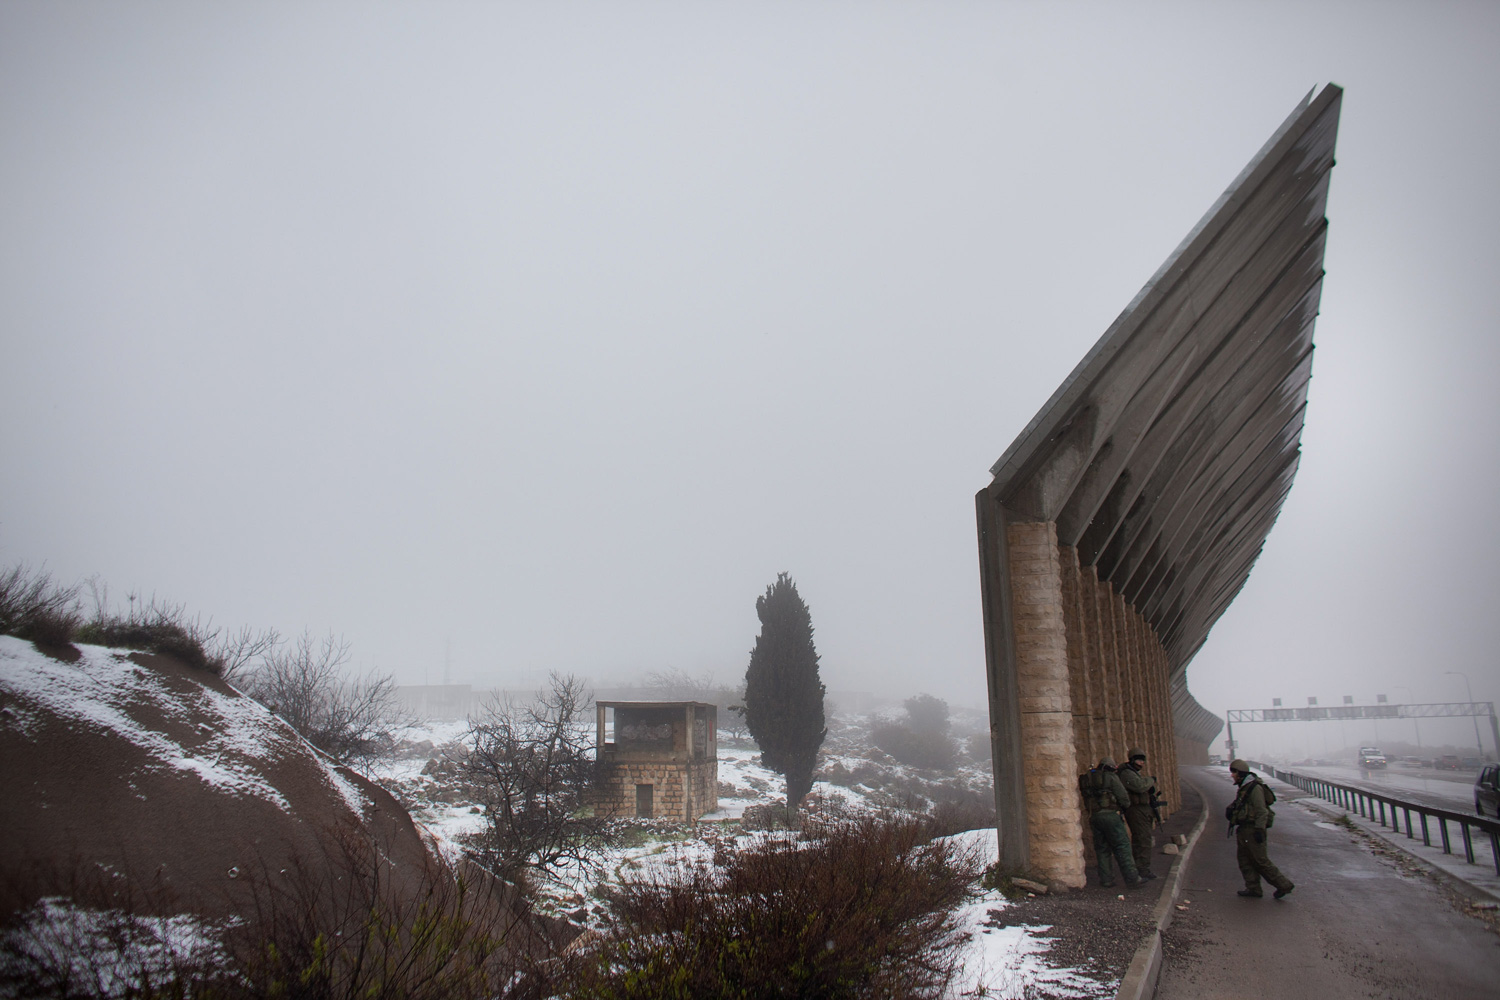 March 2, 2012. Israeli soldiers stand guard near Israel's separation barrier as snow falls near Hebron, West Bank.